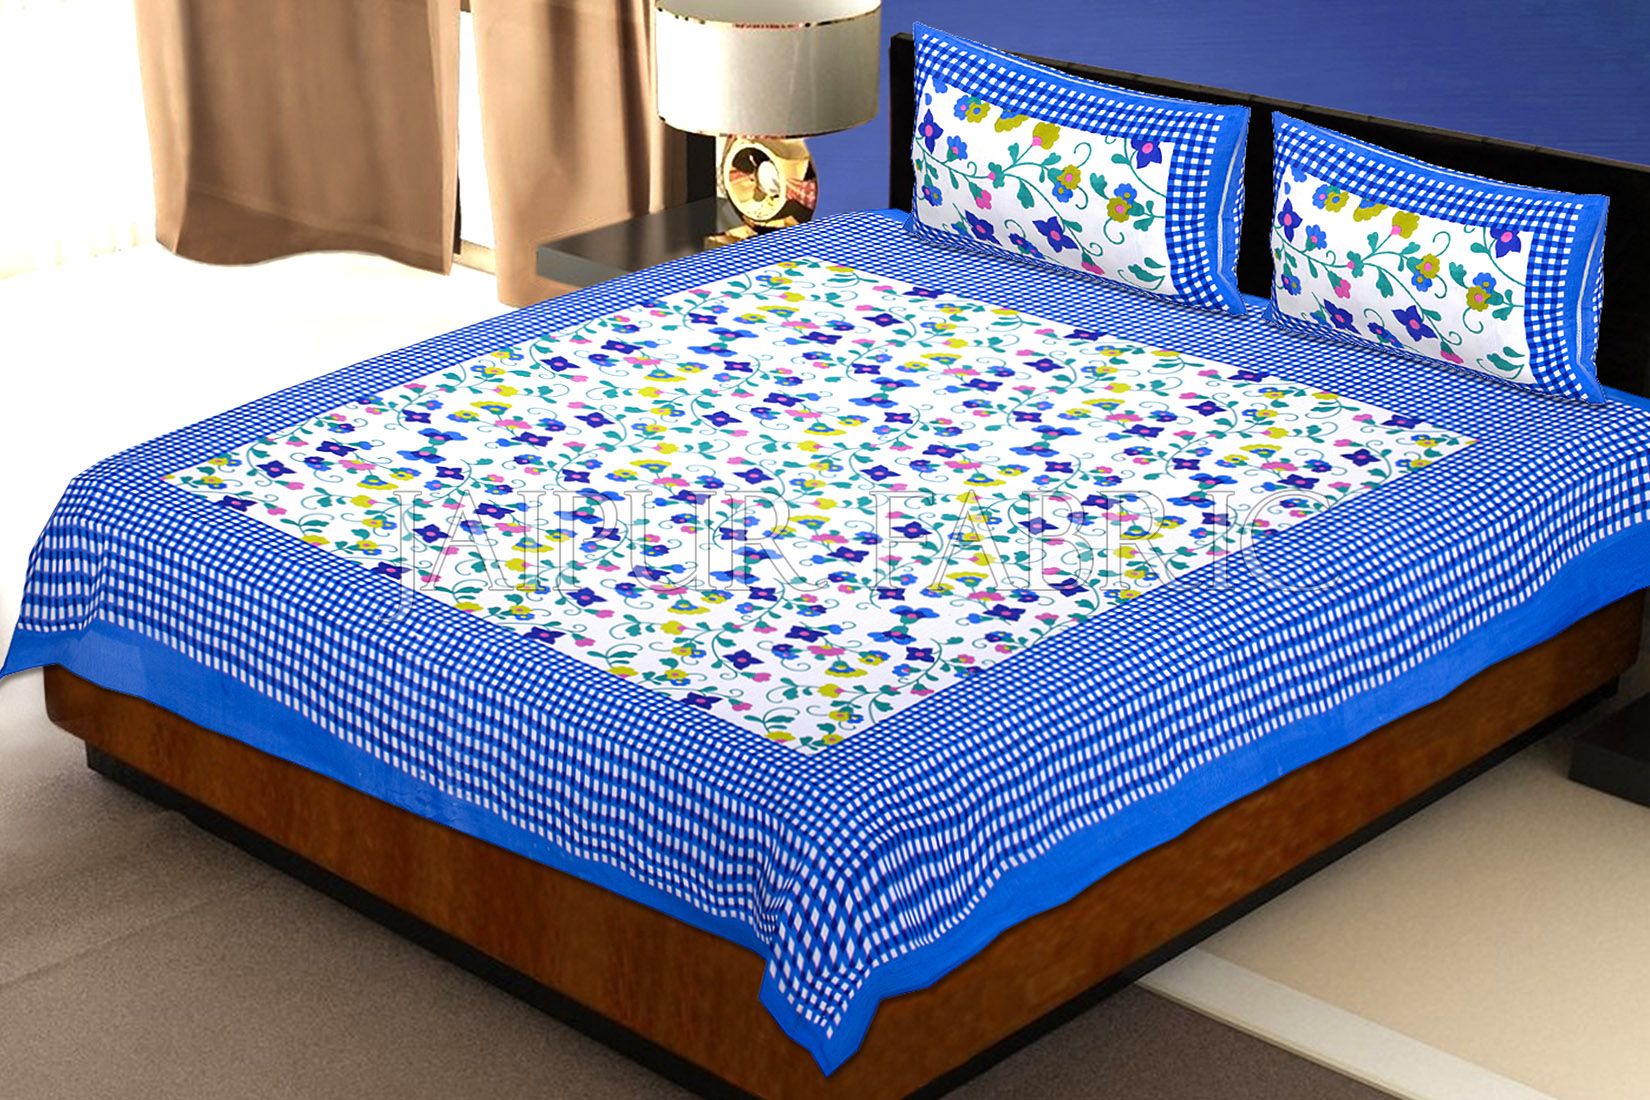 Blue Checkered Border Floral Print Cotton Double Bed Sheet